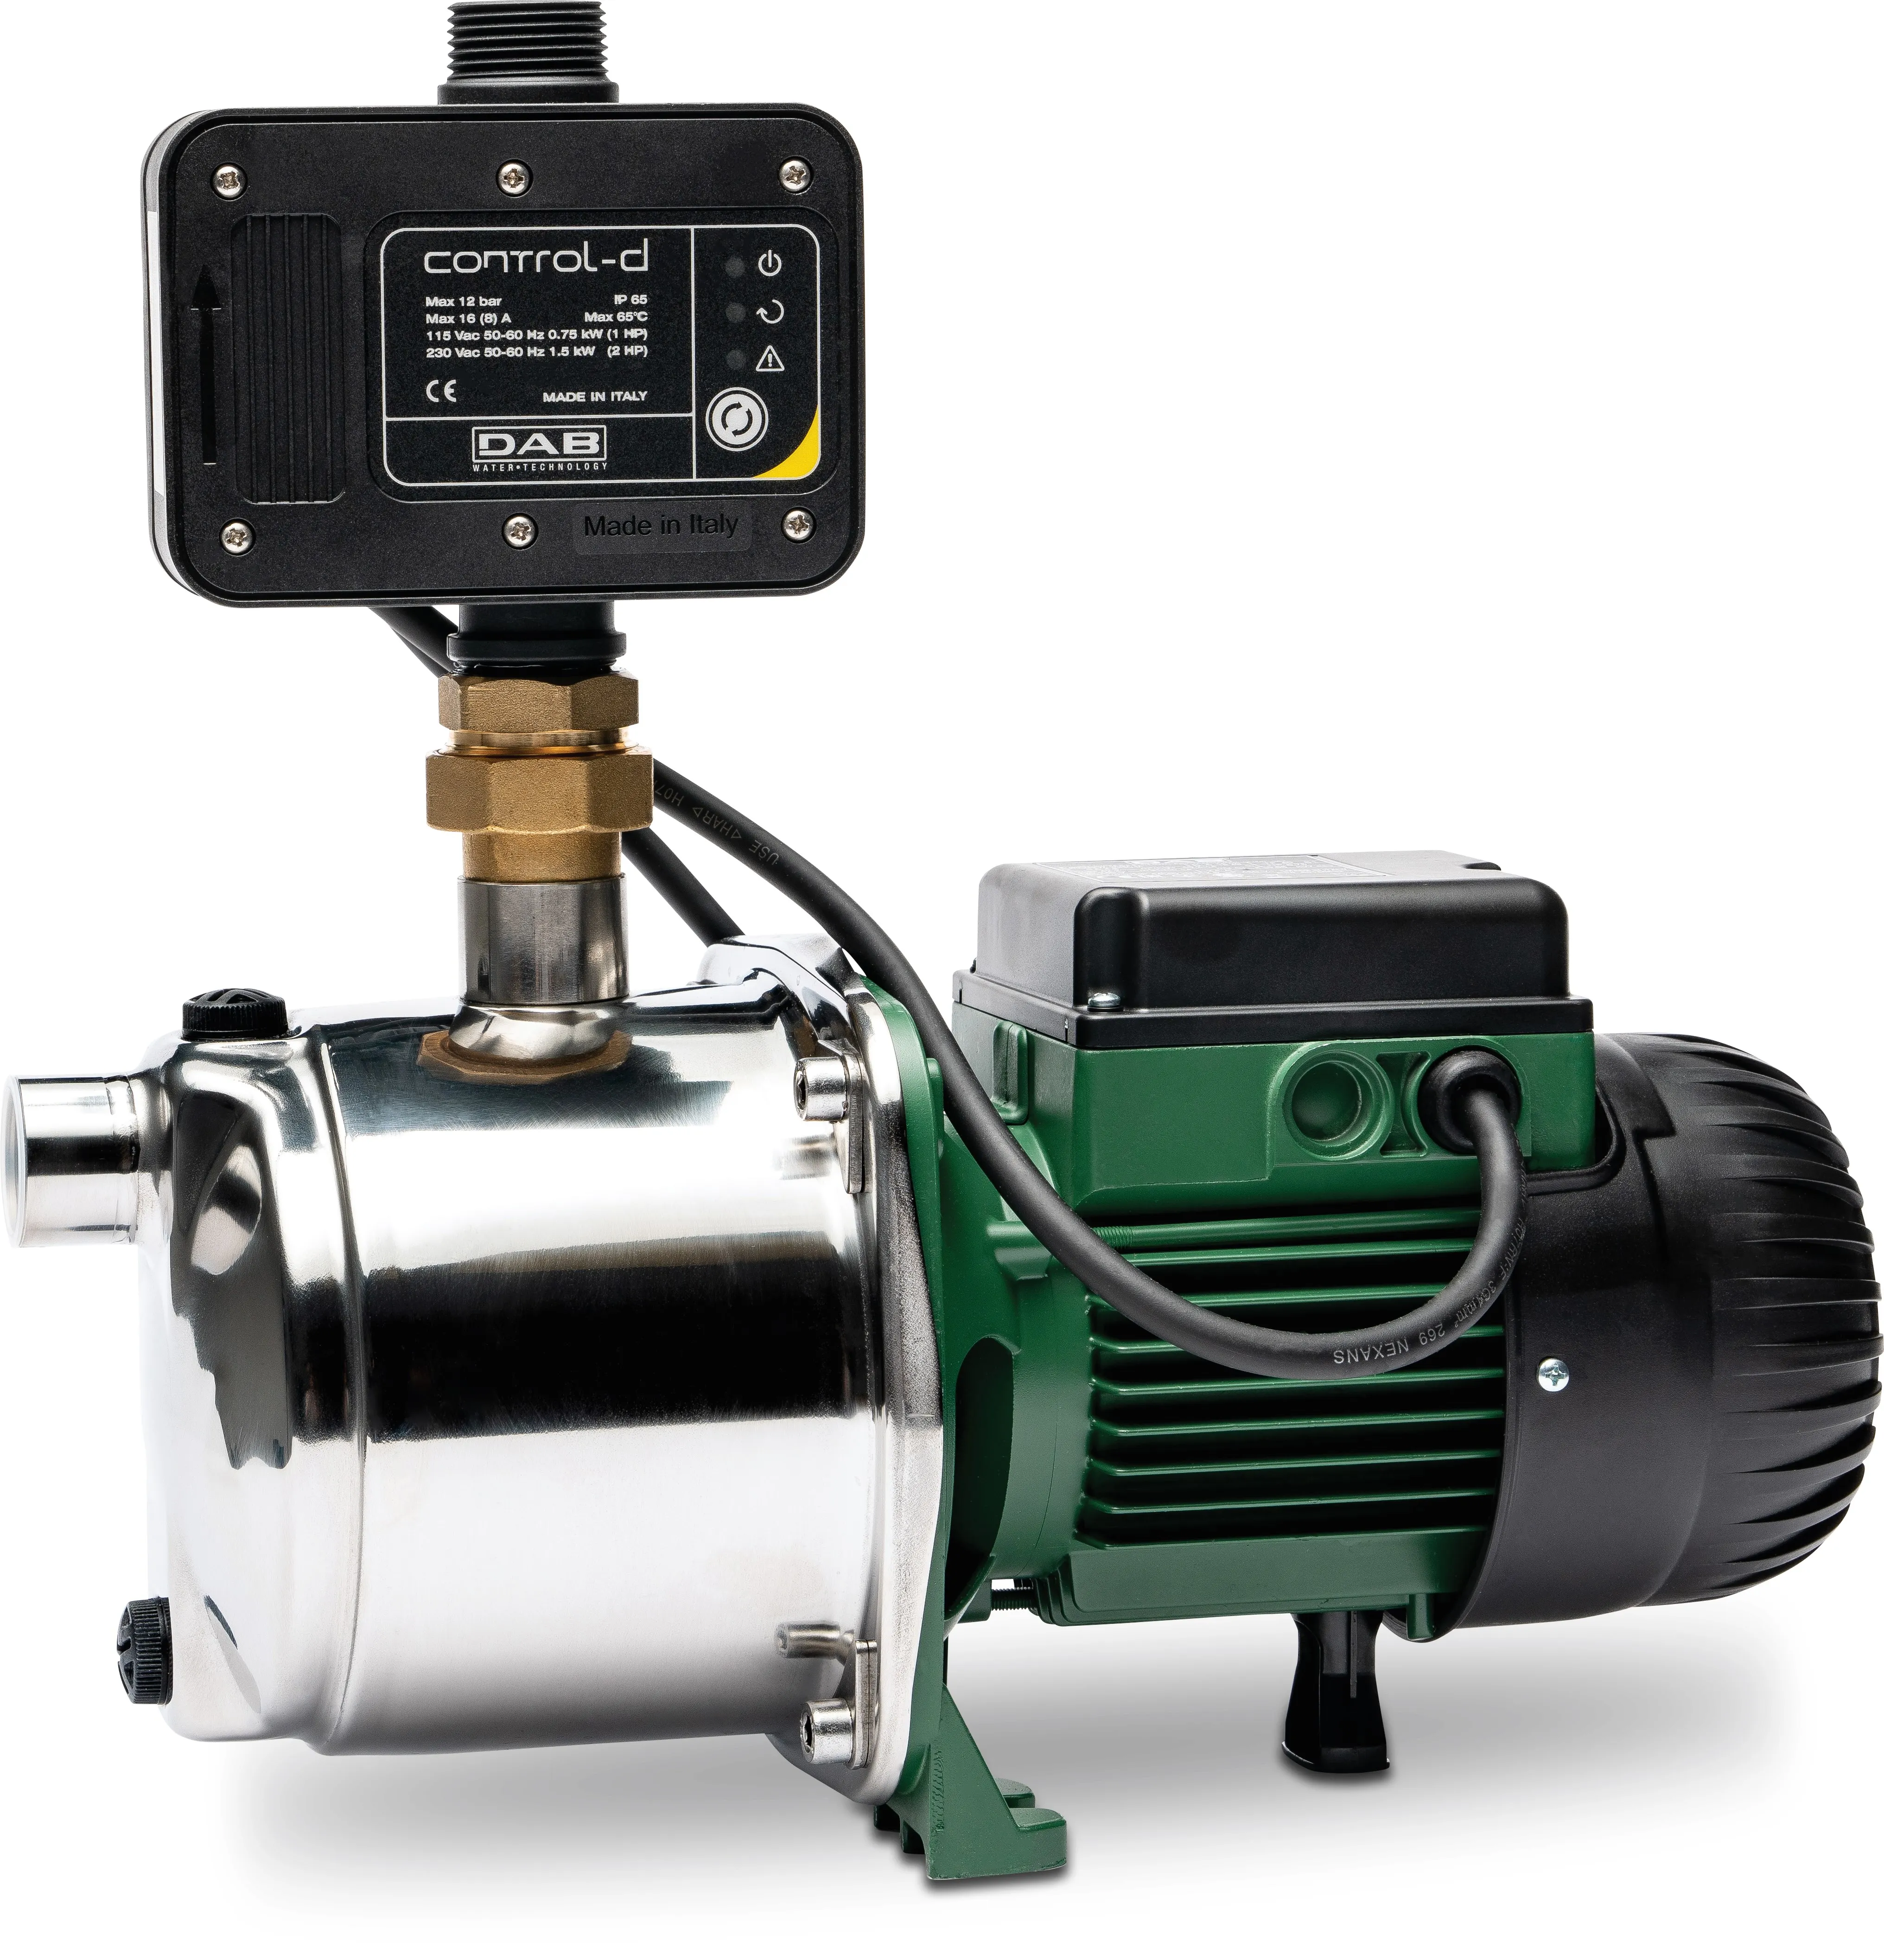 DAB Centrifugal pump stainless steel 304 1" female thread x male thread 230VAC green self priming with press control type EUROINOX 30/50 Control D